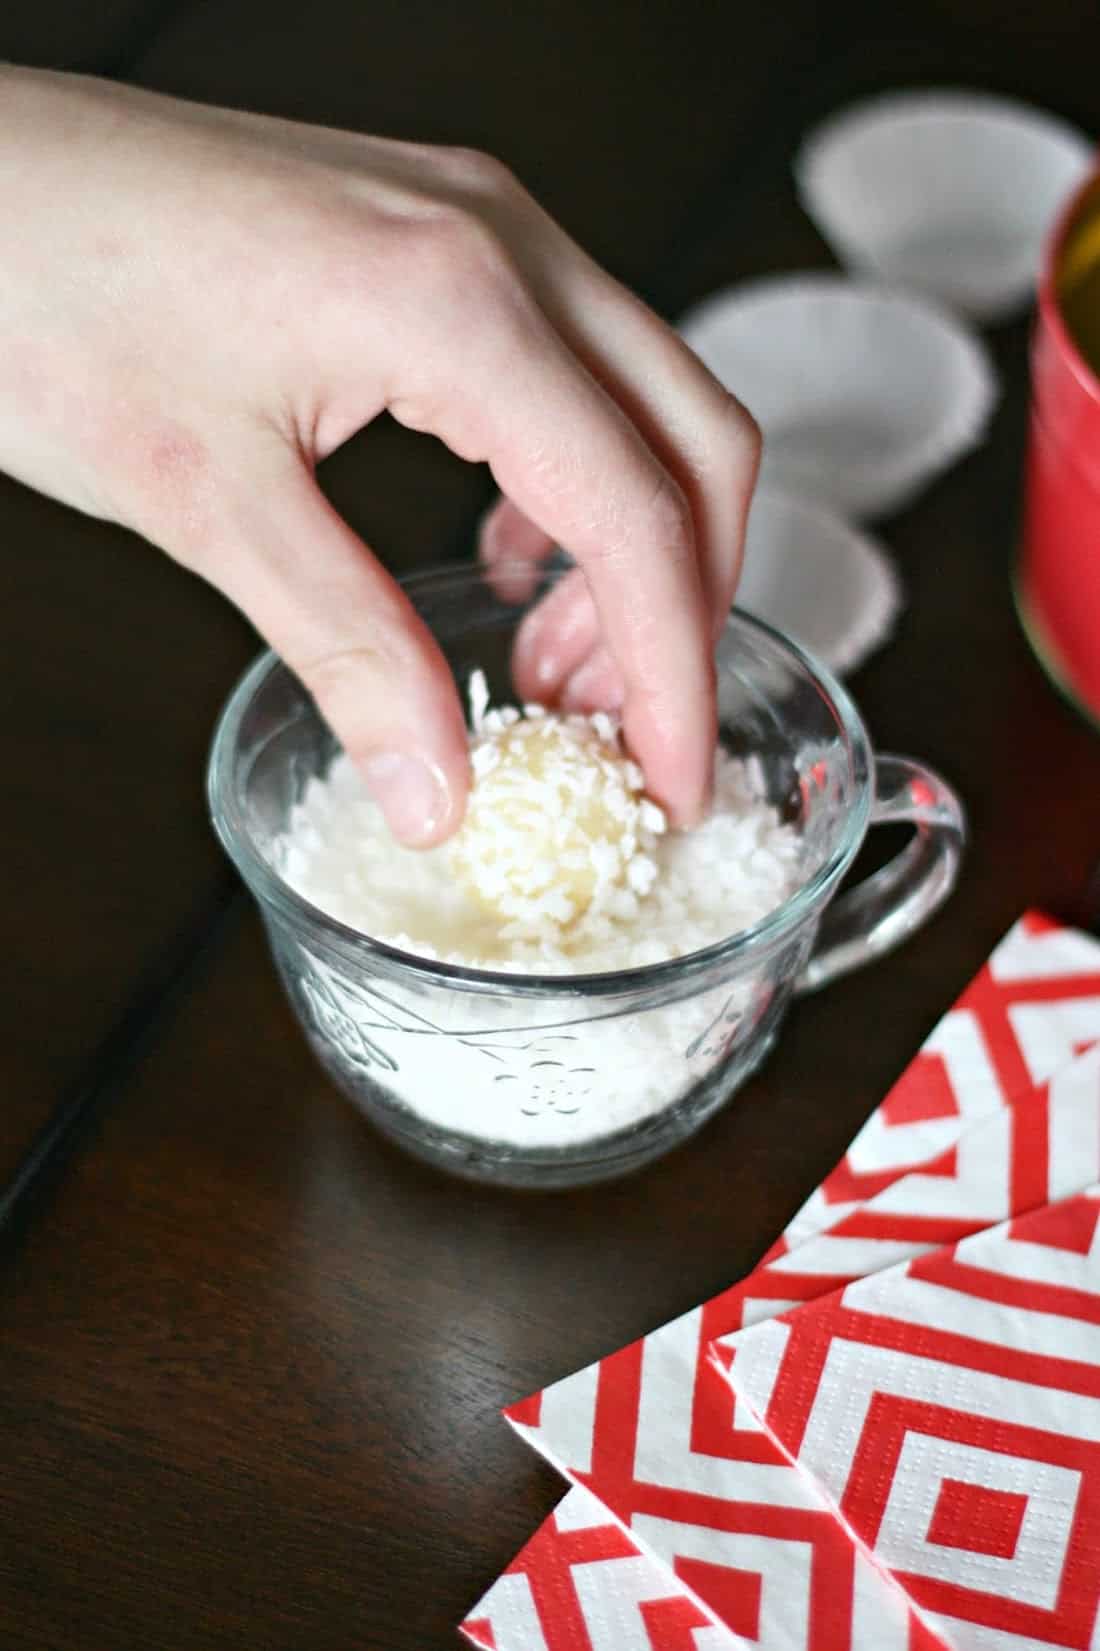 Dipping a beijinho in a glass container with shredded coconut